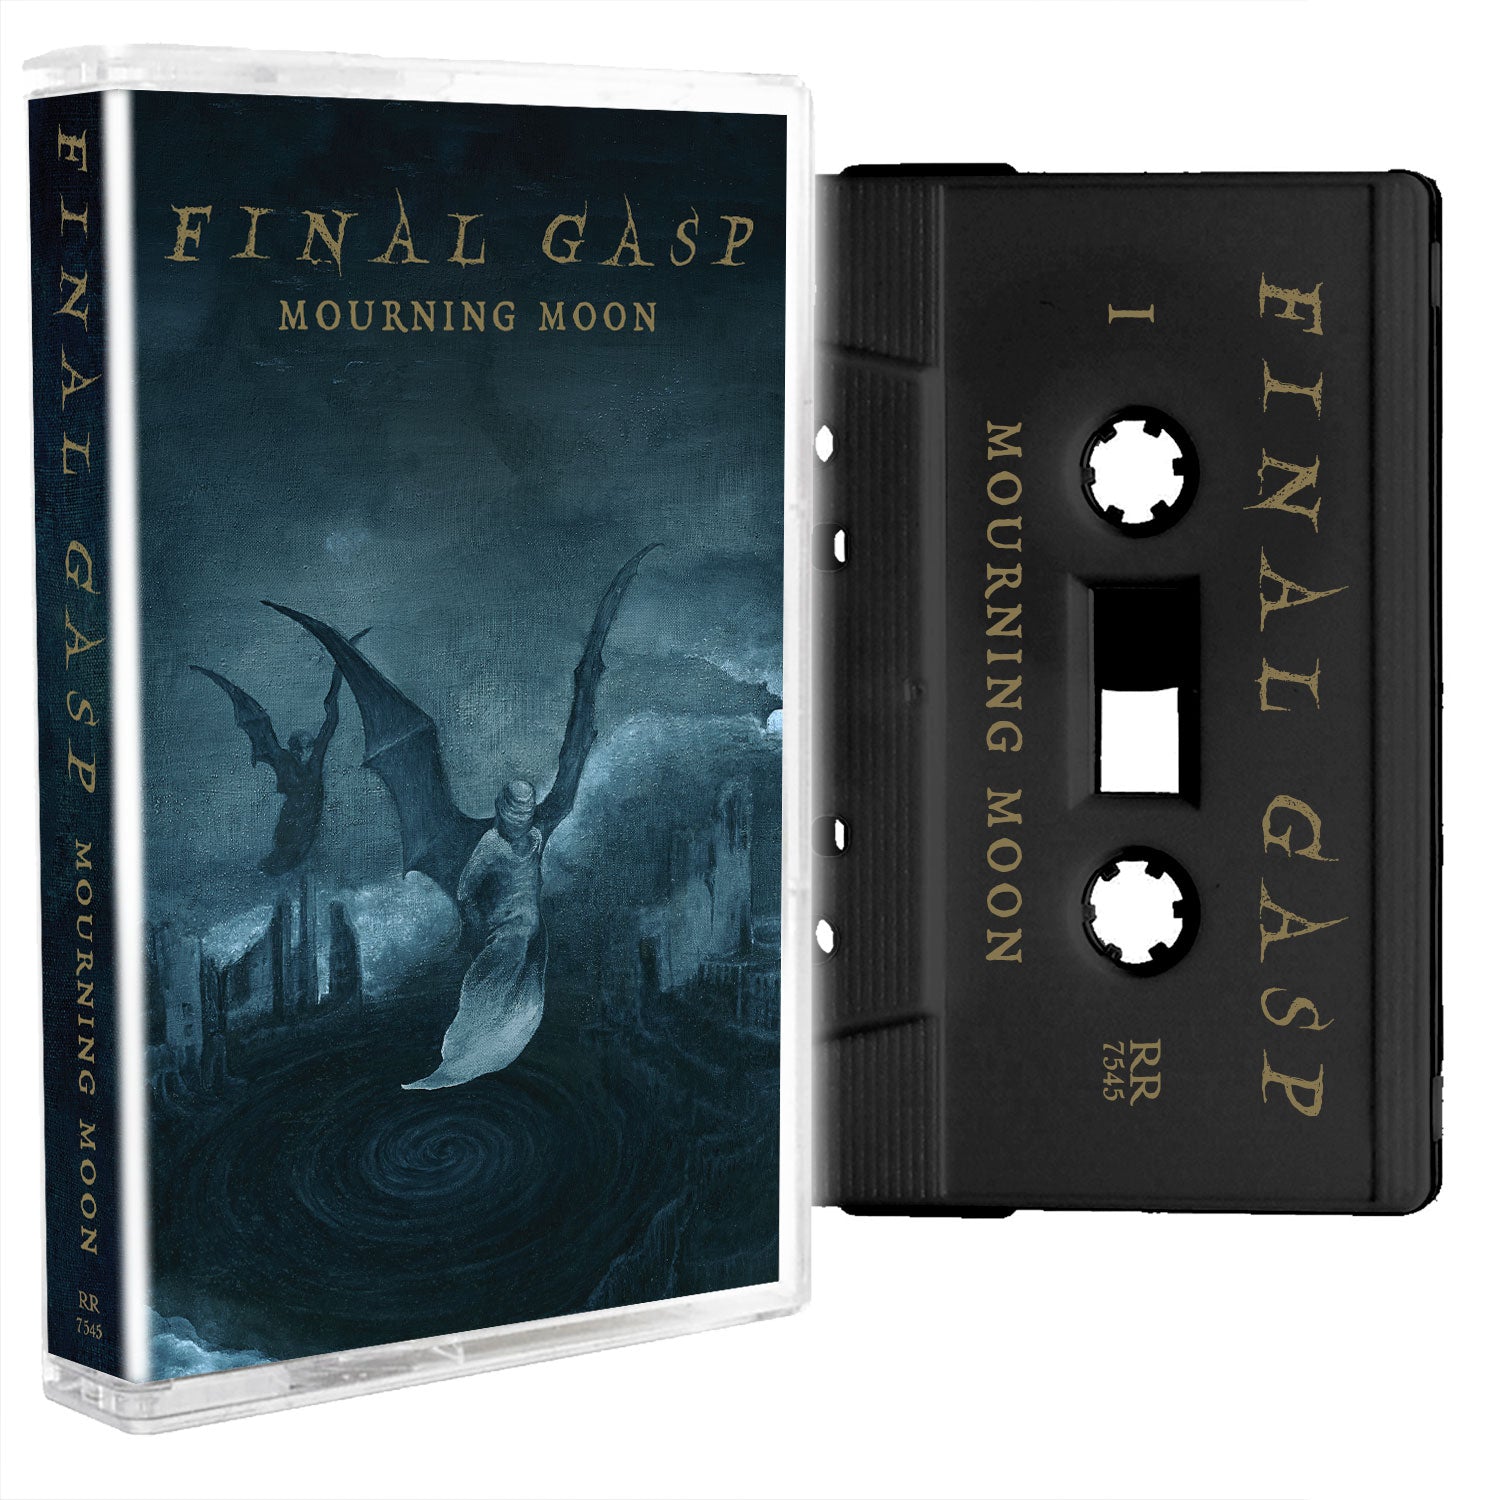 Final Gasp "Mourning Moon" Cassette